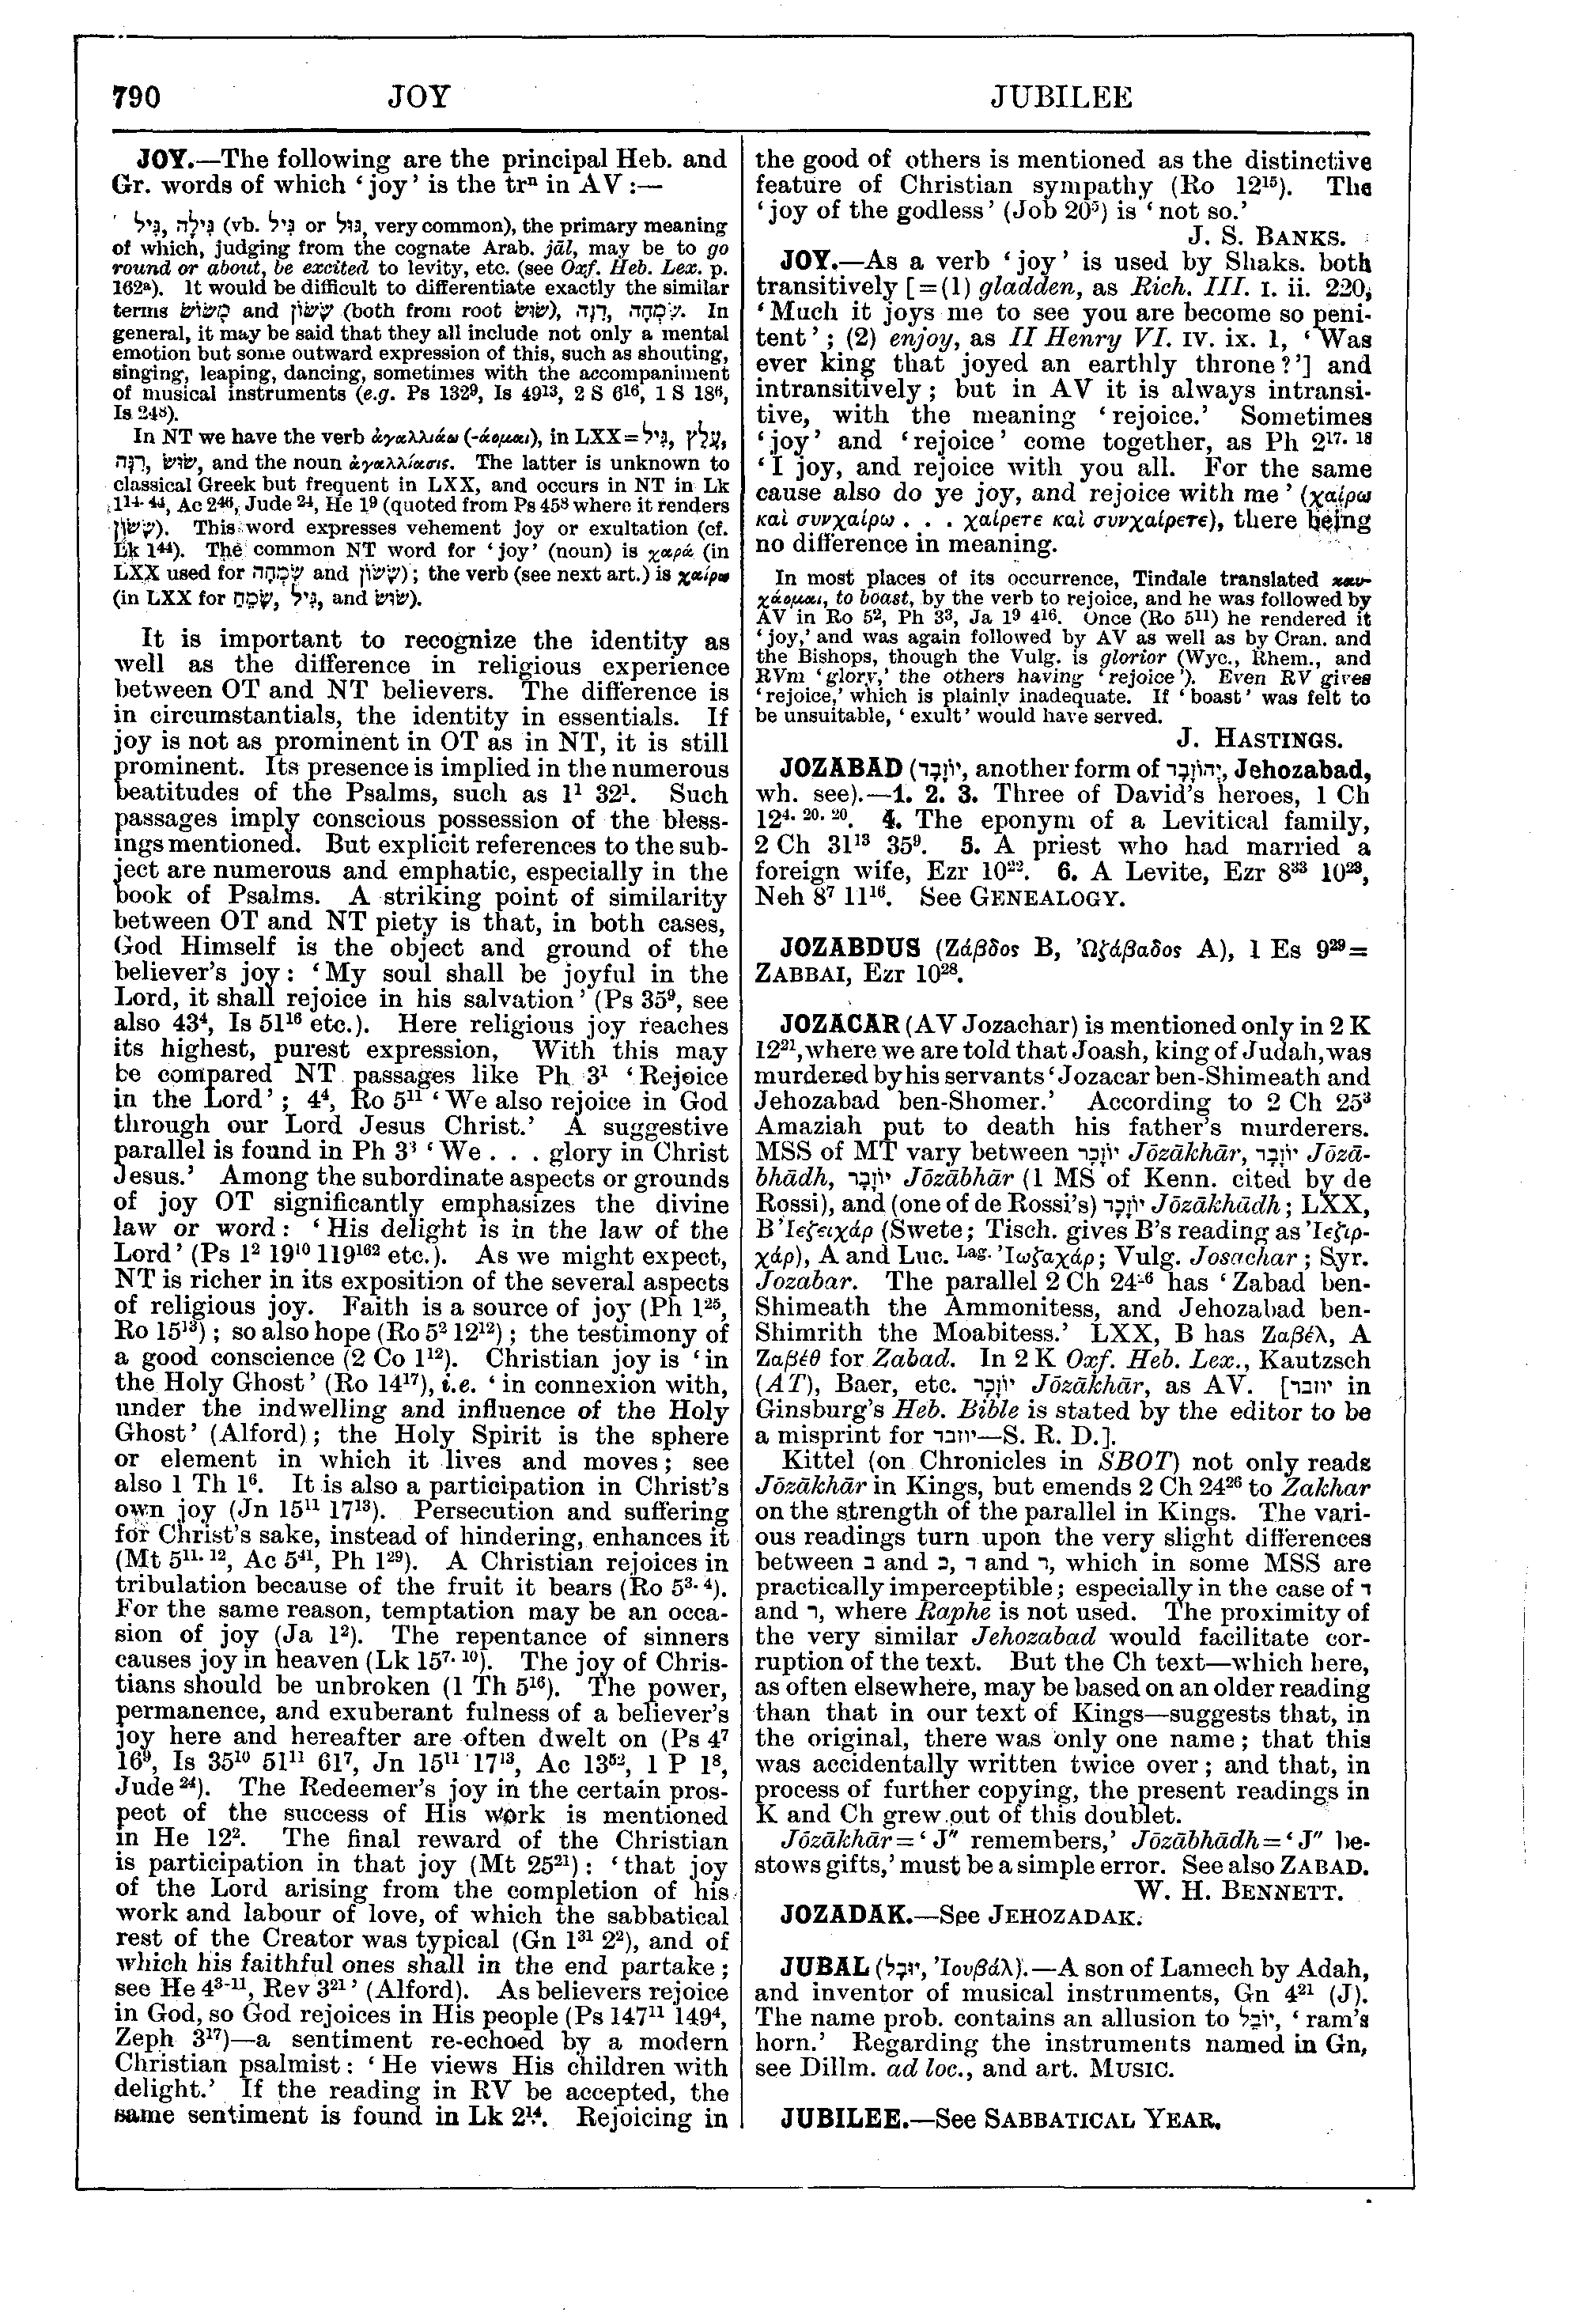 Image of page 790